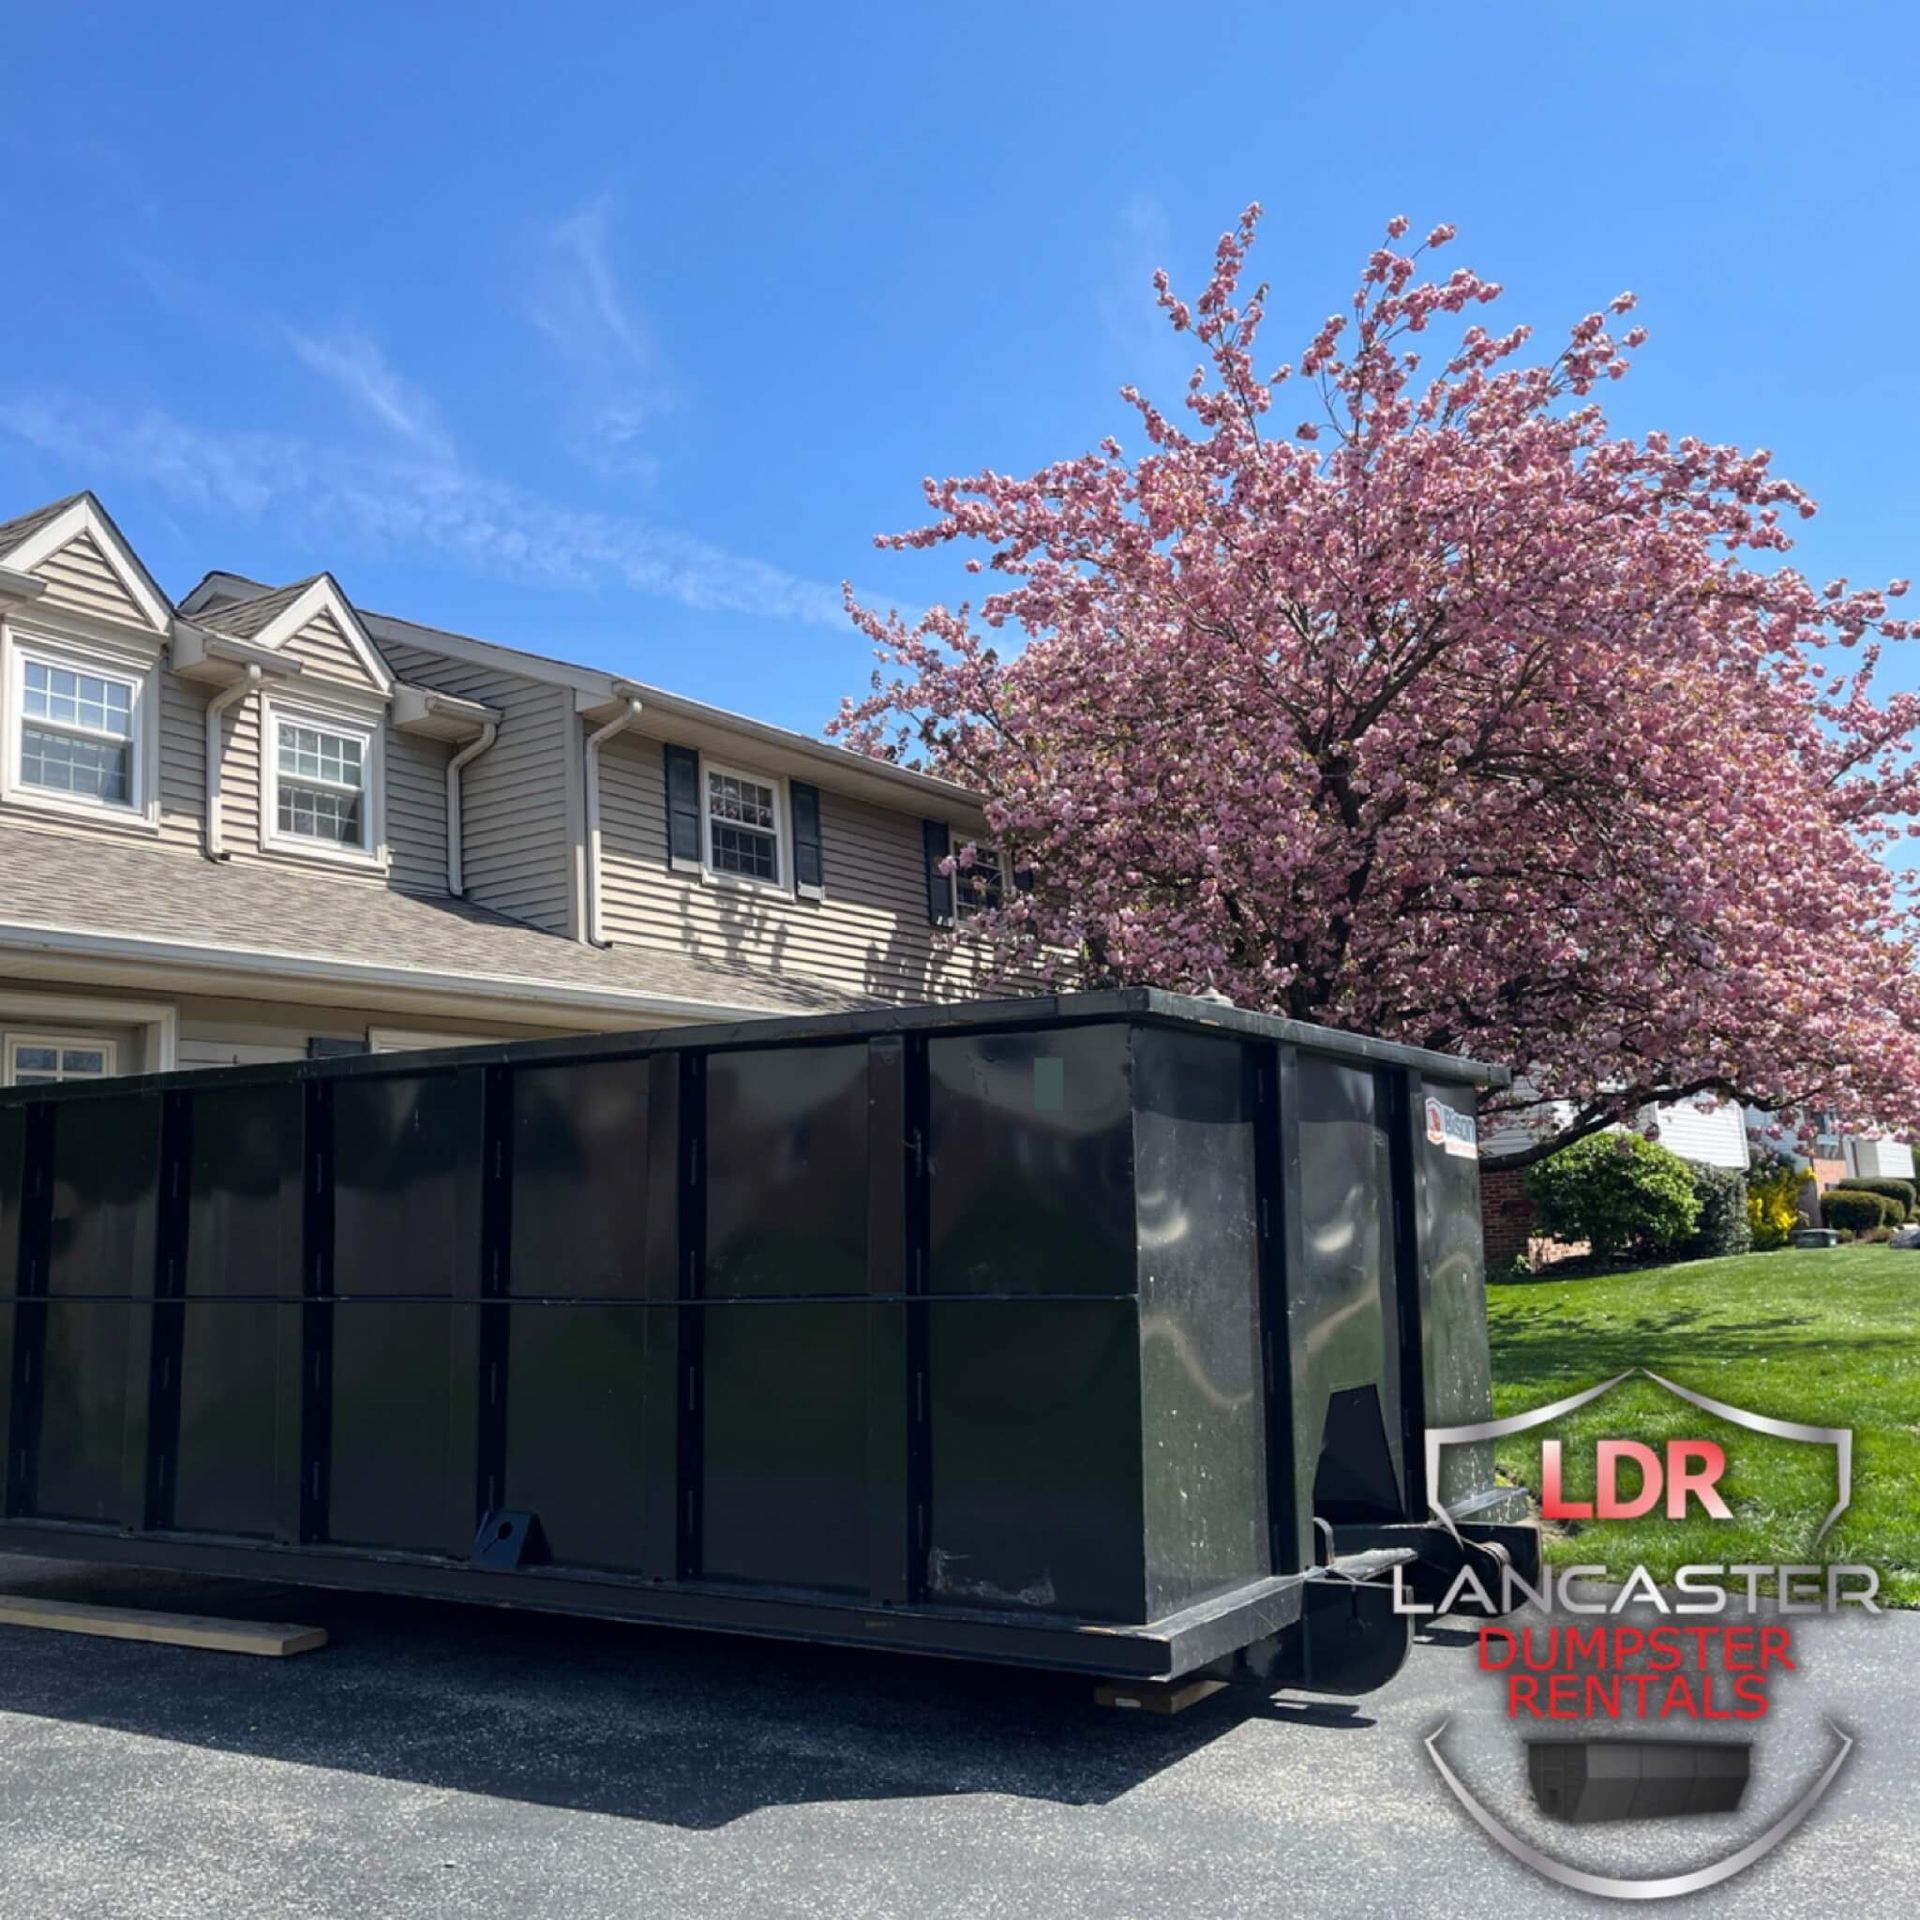 Dumpster Rental in Columbia Pa, 17512